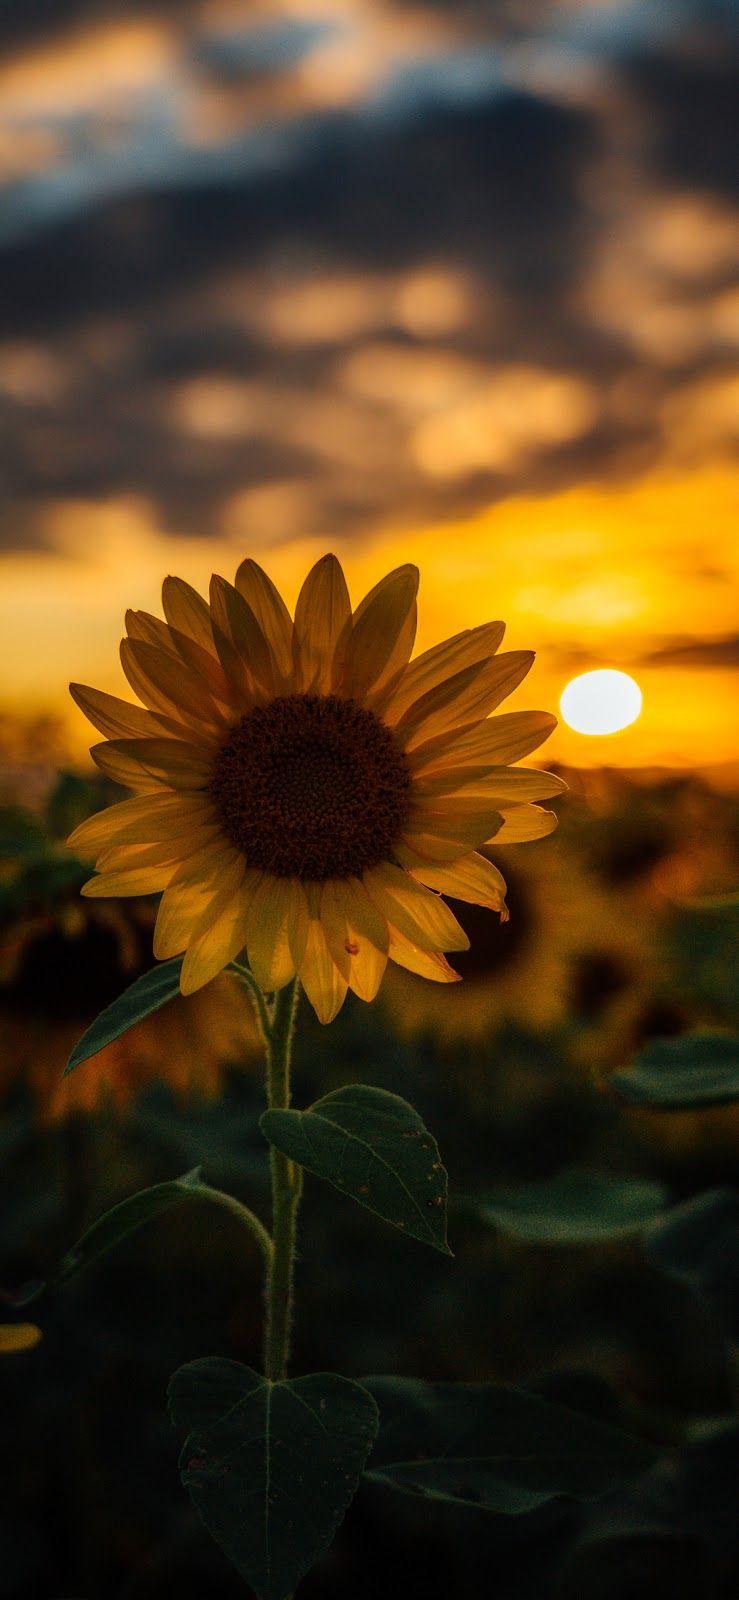 Sunflower Phone Wallpapers Top Free Sunflower Phone Backgrounds